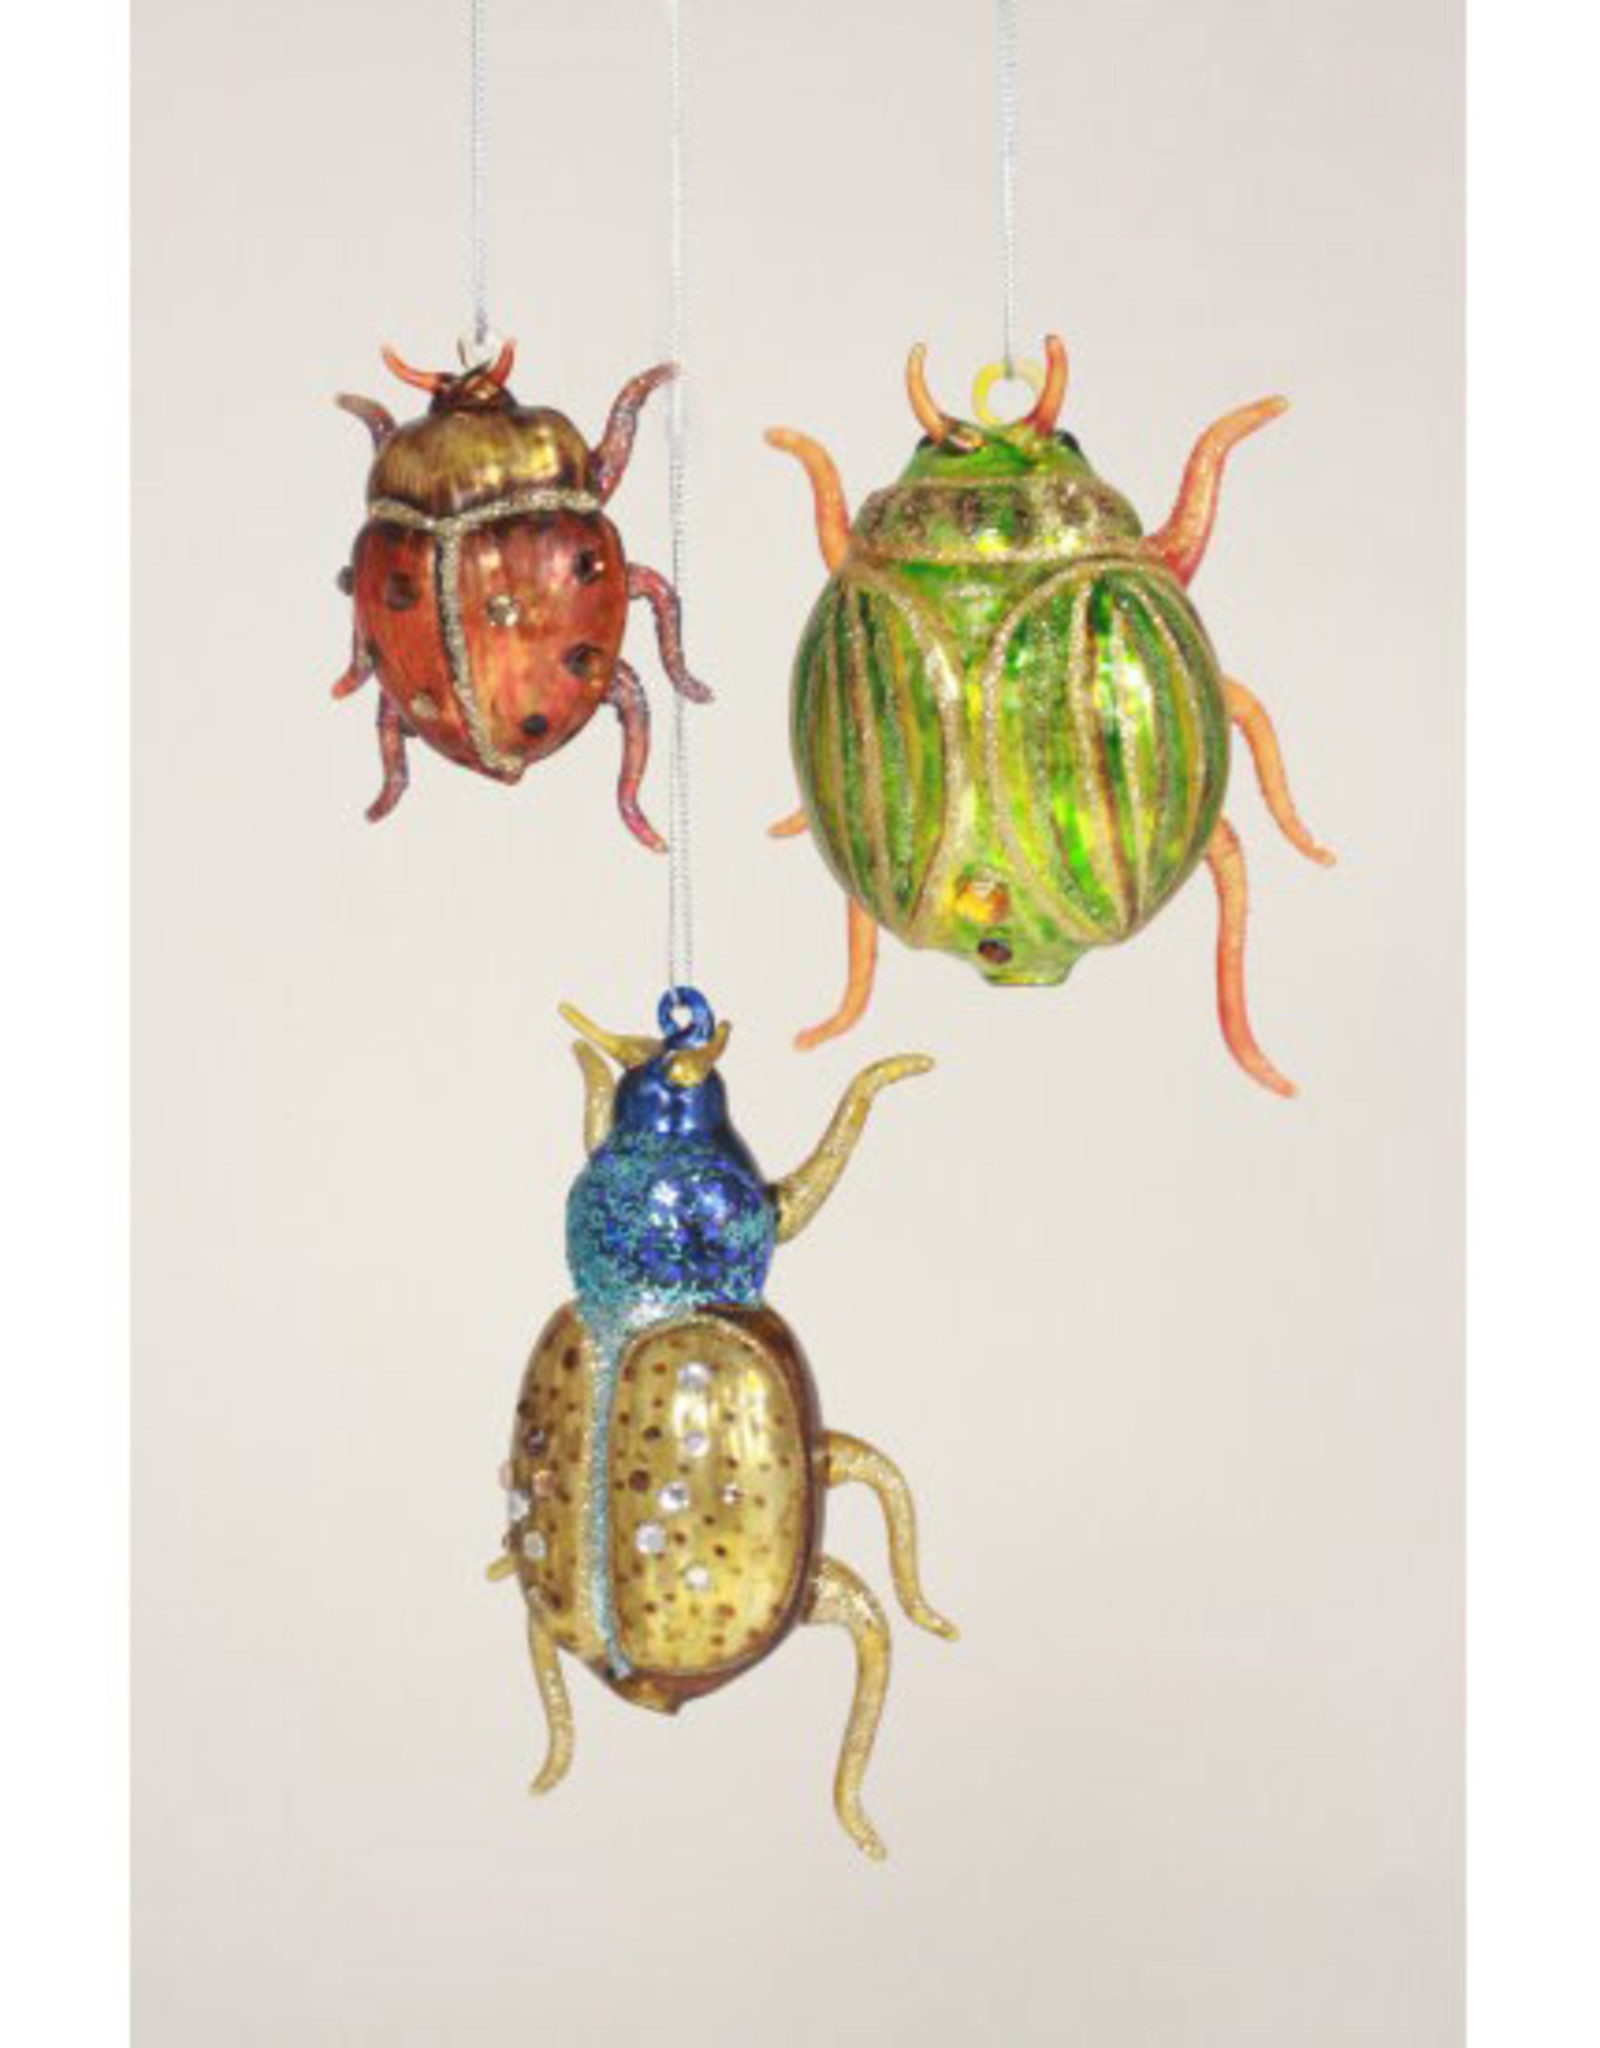 Cody Foster & Co. GLITTERED INSECT ORNAMENT - 3 STYLES